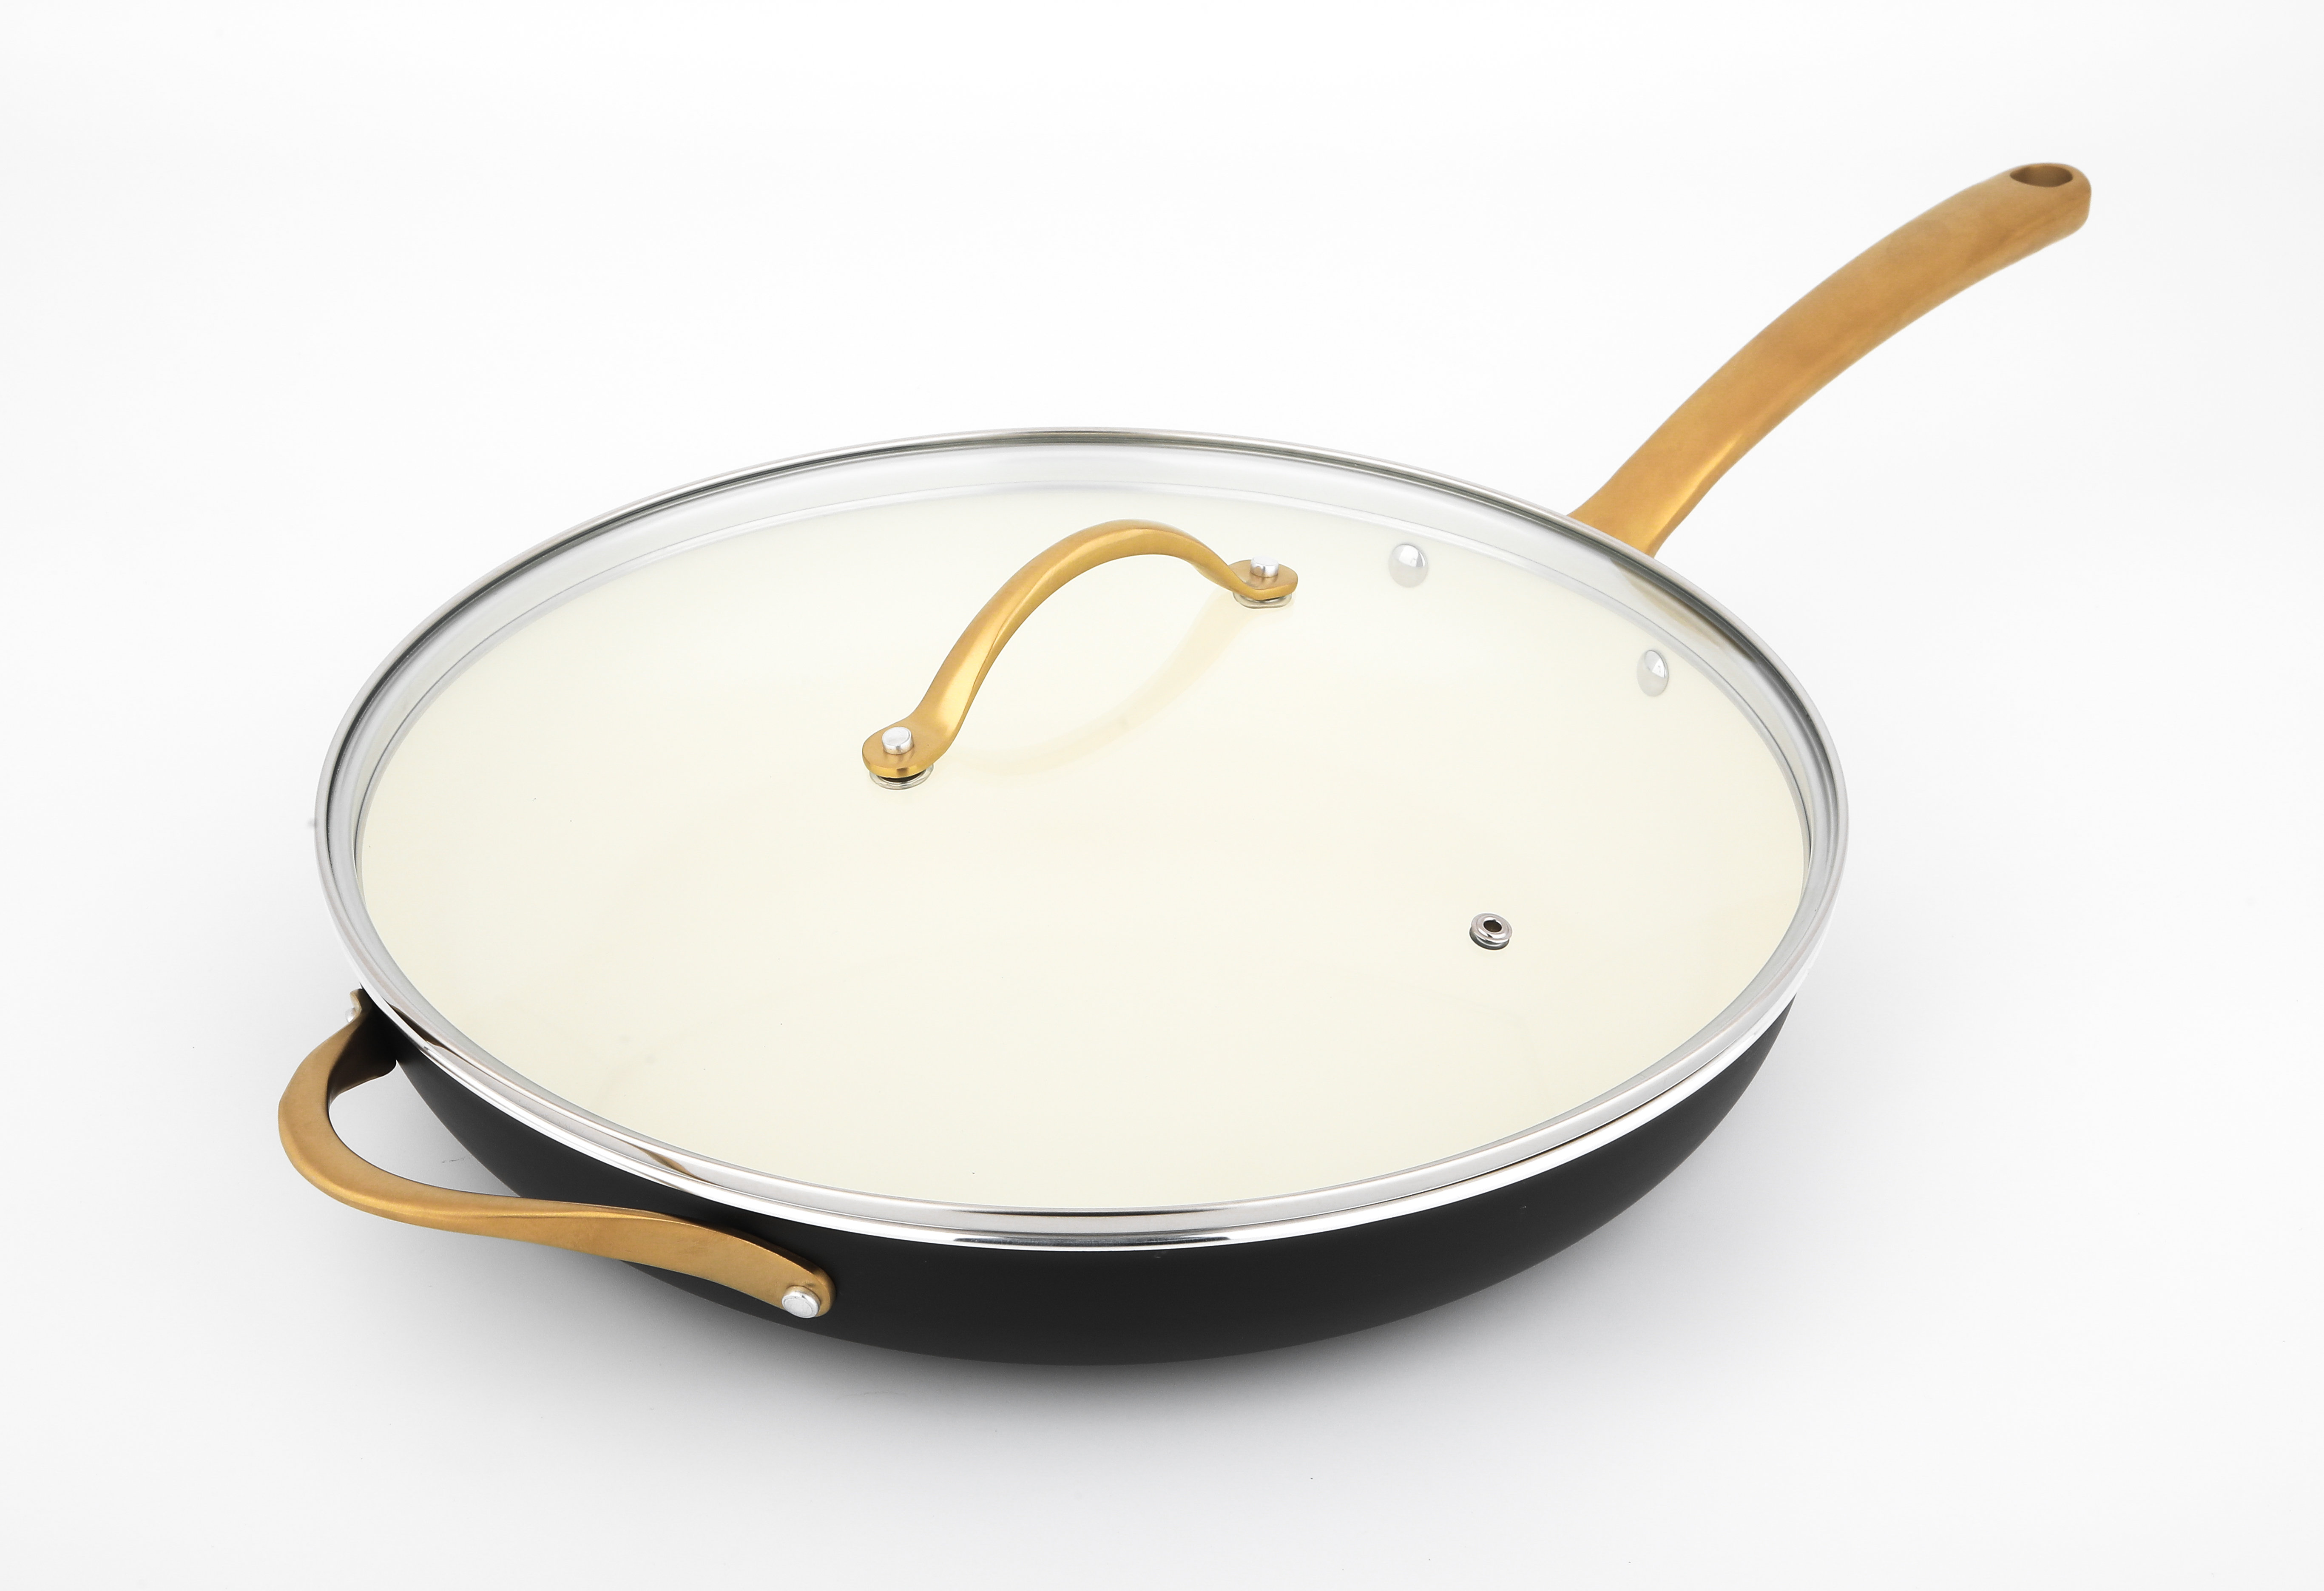 NutriChef 14 Fry Pan With Lid - Extra Large Skillet Nonstick